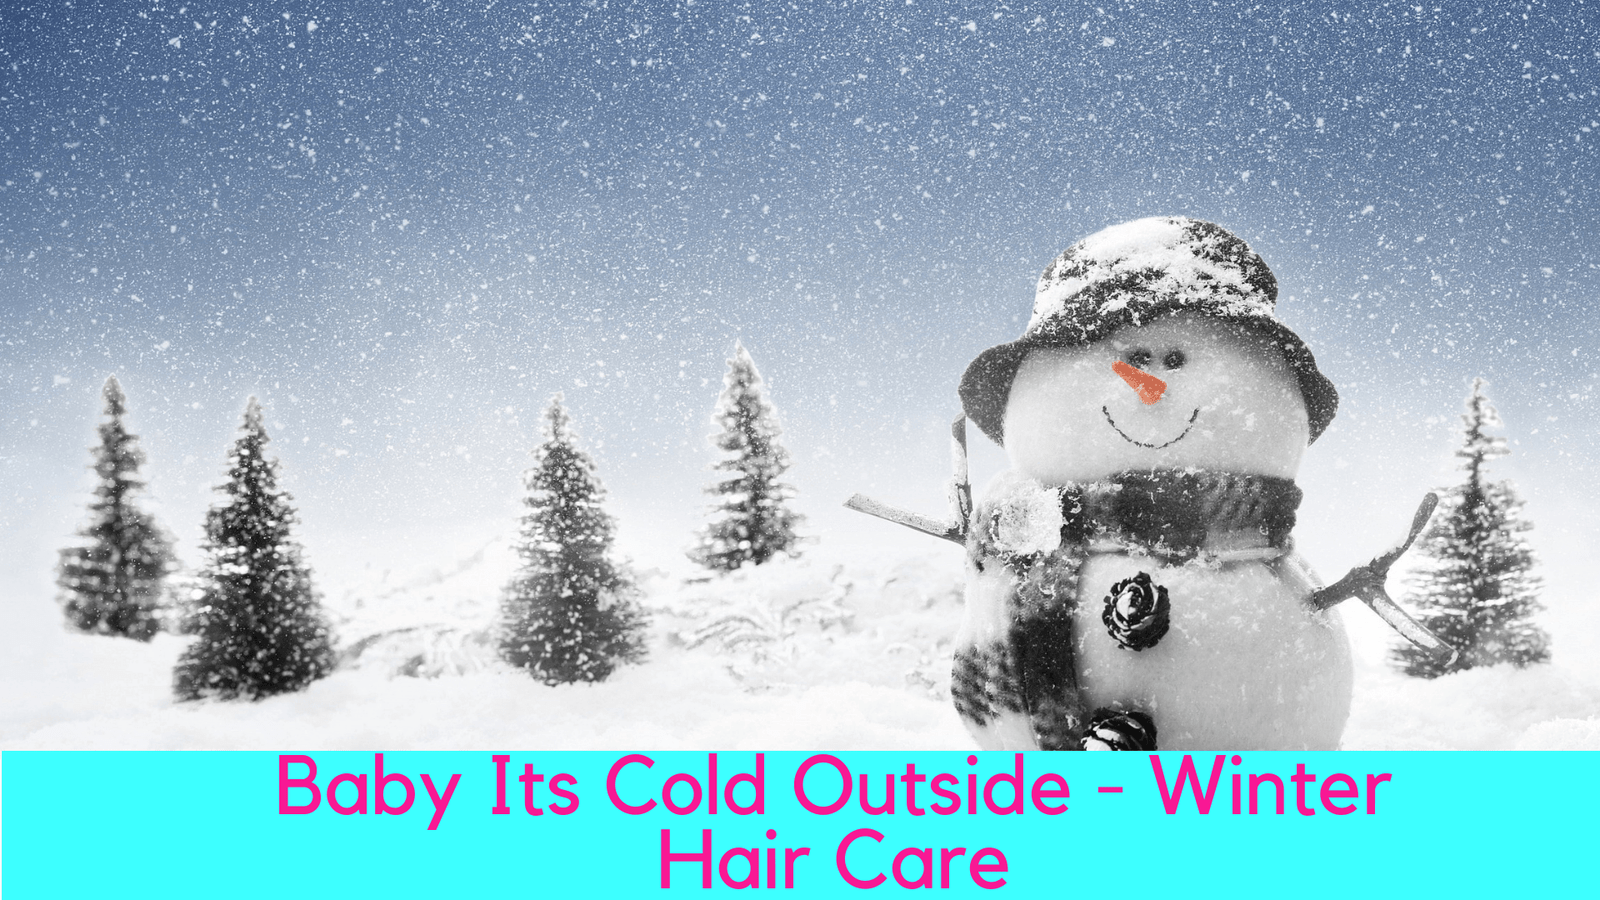 Baby Its Cold Outside – Winter Hair Care